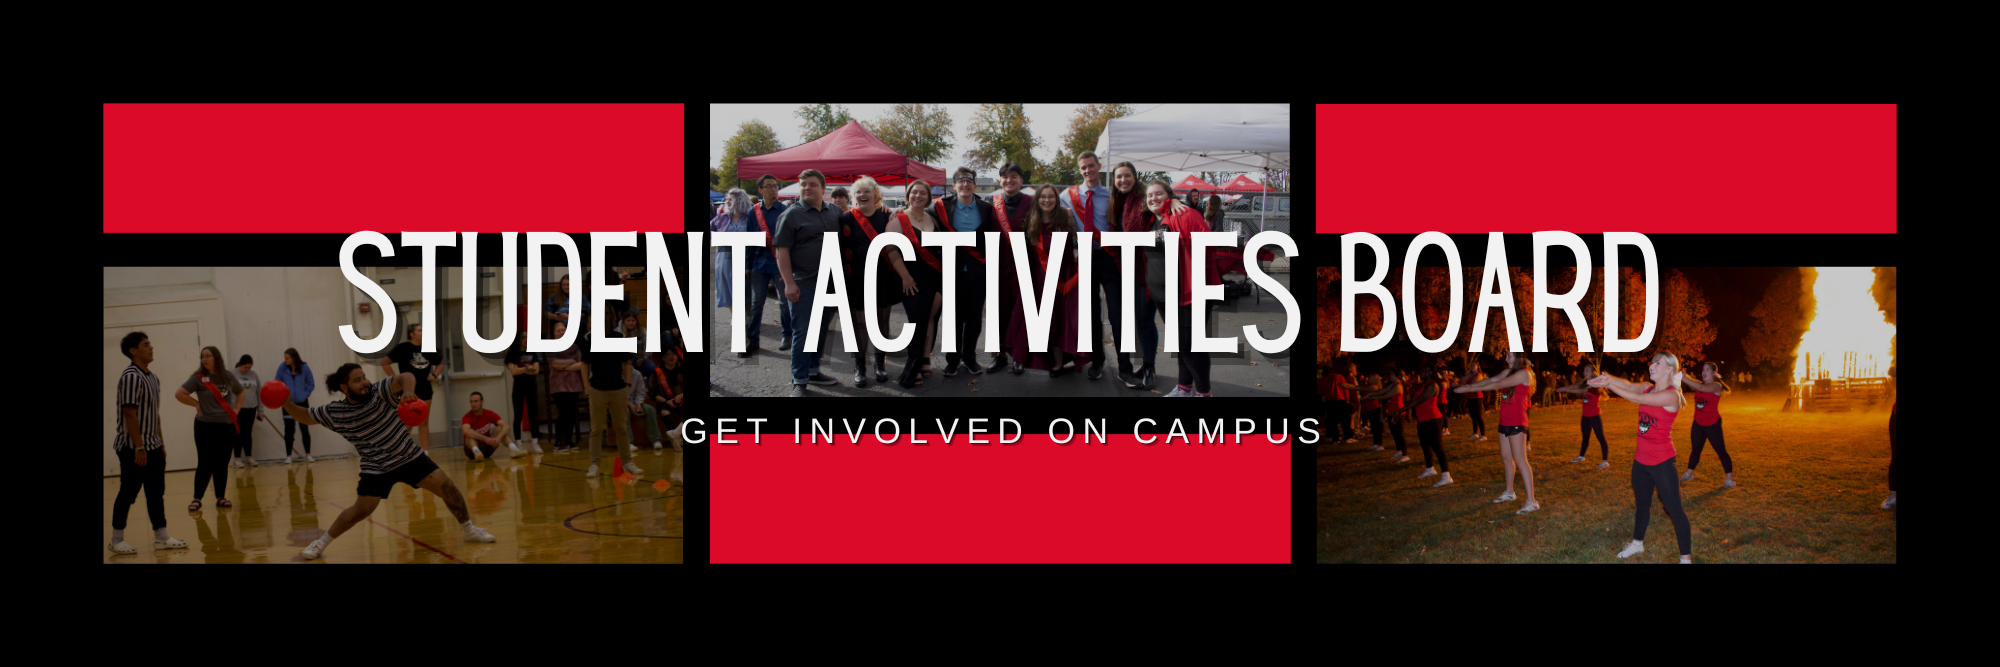 Collage with pictures of people playing dodge ball, a group photo of people with sashes, and students at bon fire. The words "Student Activities Board" and "Get involved on campus" are superimposed over the photos.